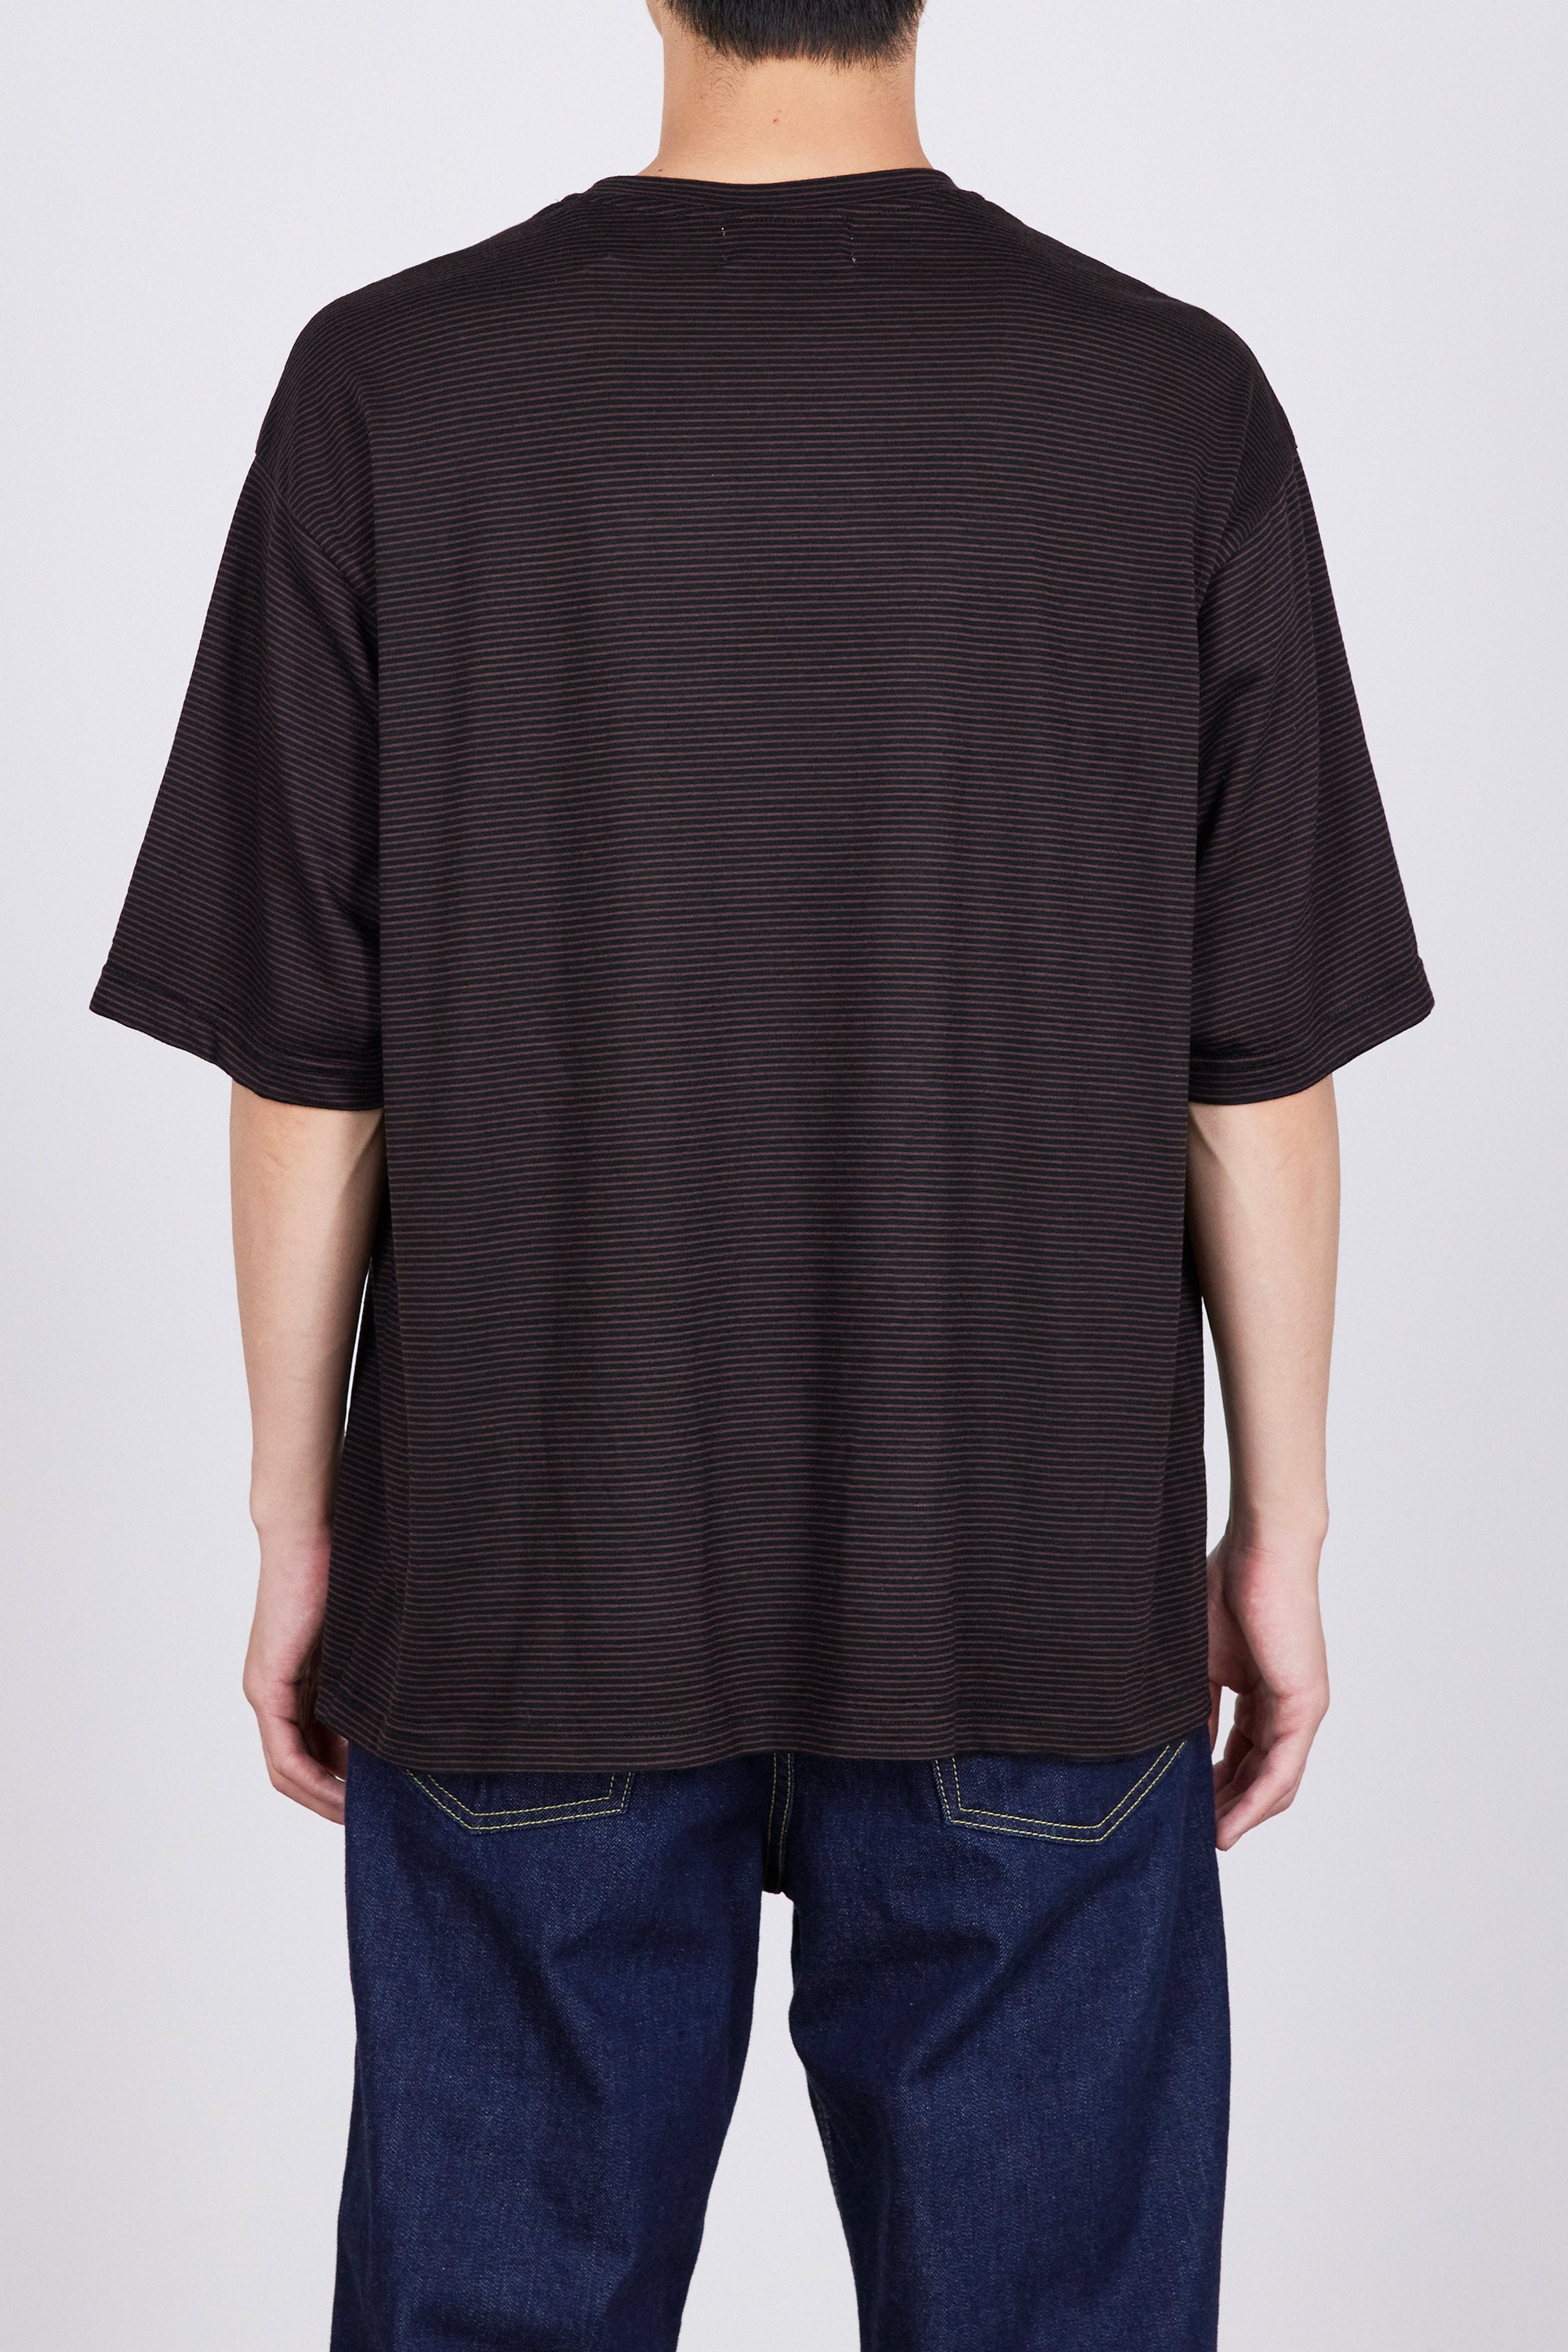 SUPER120s WOOL SINGLE JERSEY WASHABLE CREW NECK TEE, Black × Brown